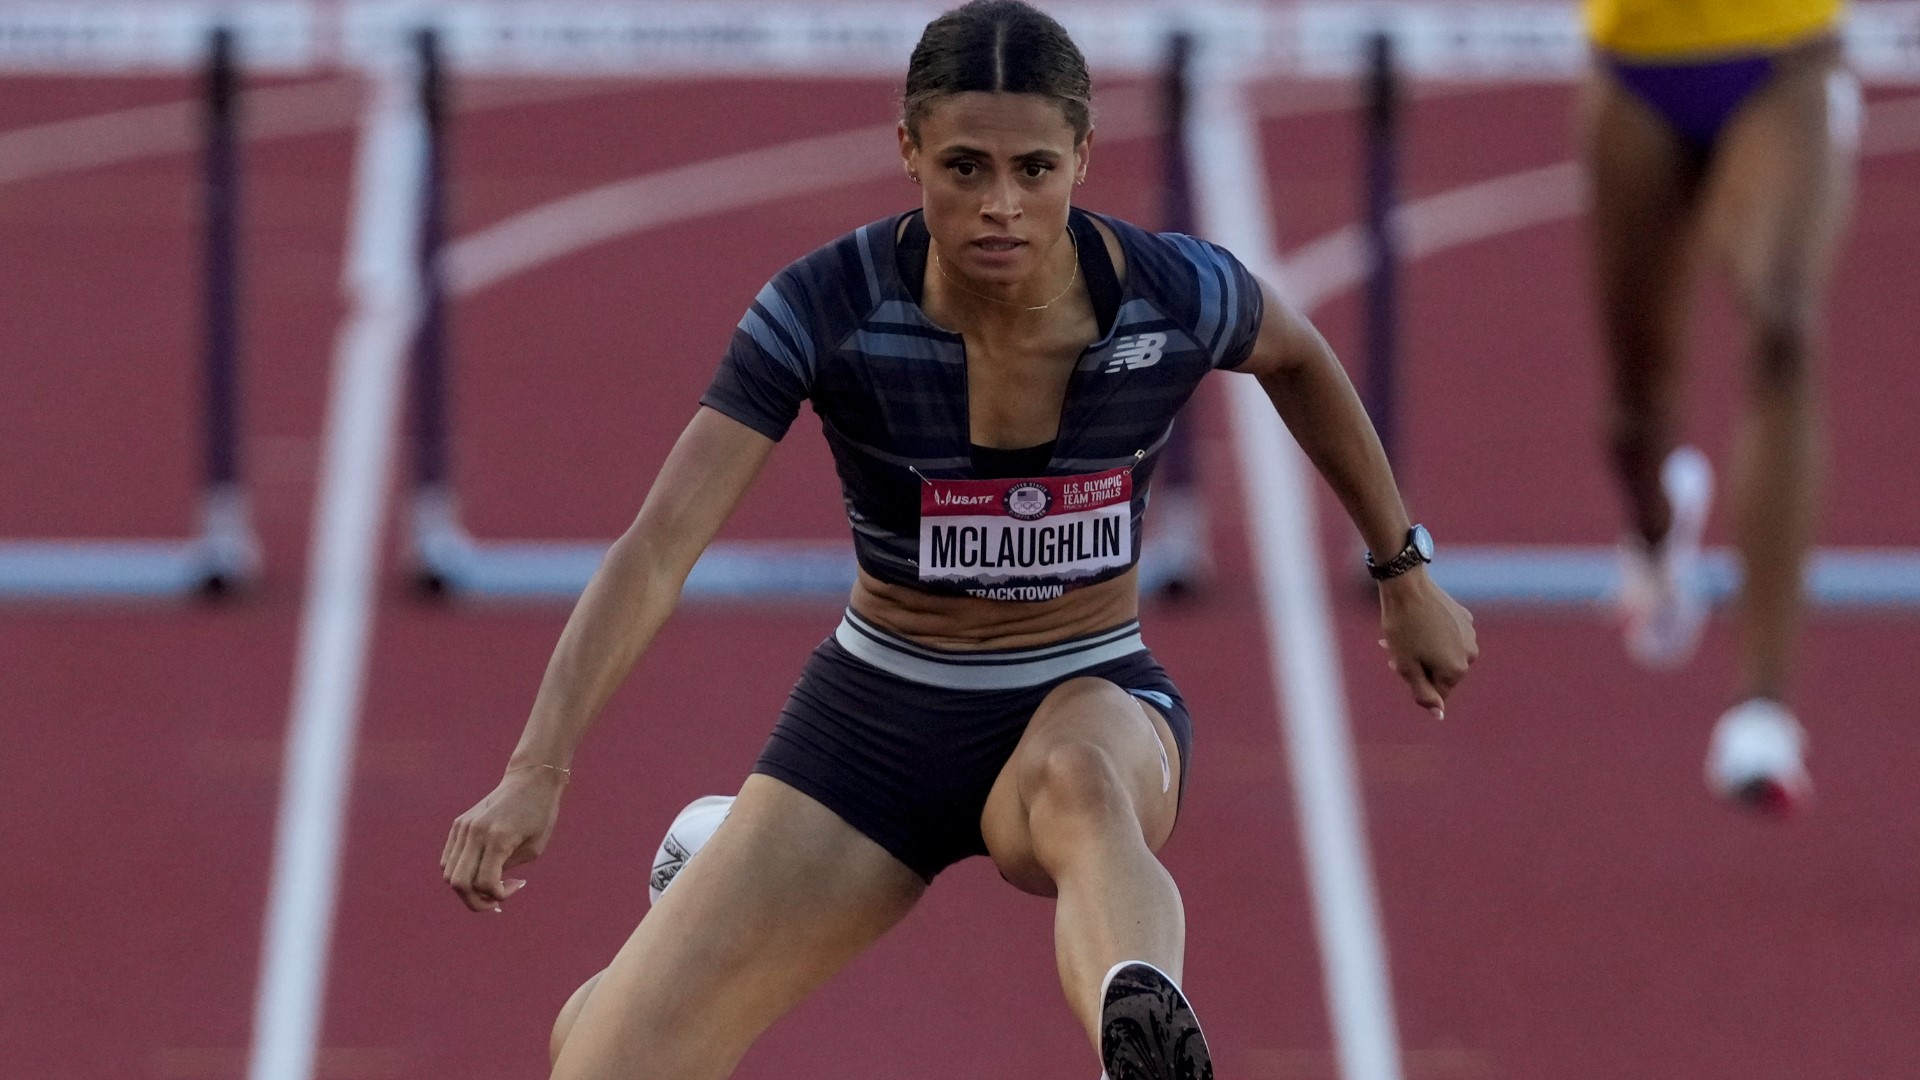 McLaughlin will turn 22 in Tokyo and she said she hopes to be able to celebrate with an Olympic gold medal in the 400-meter hurdles.